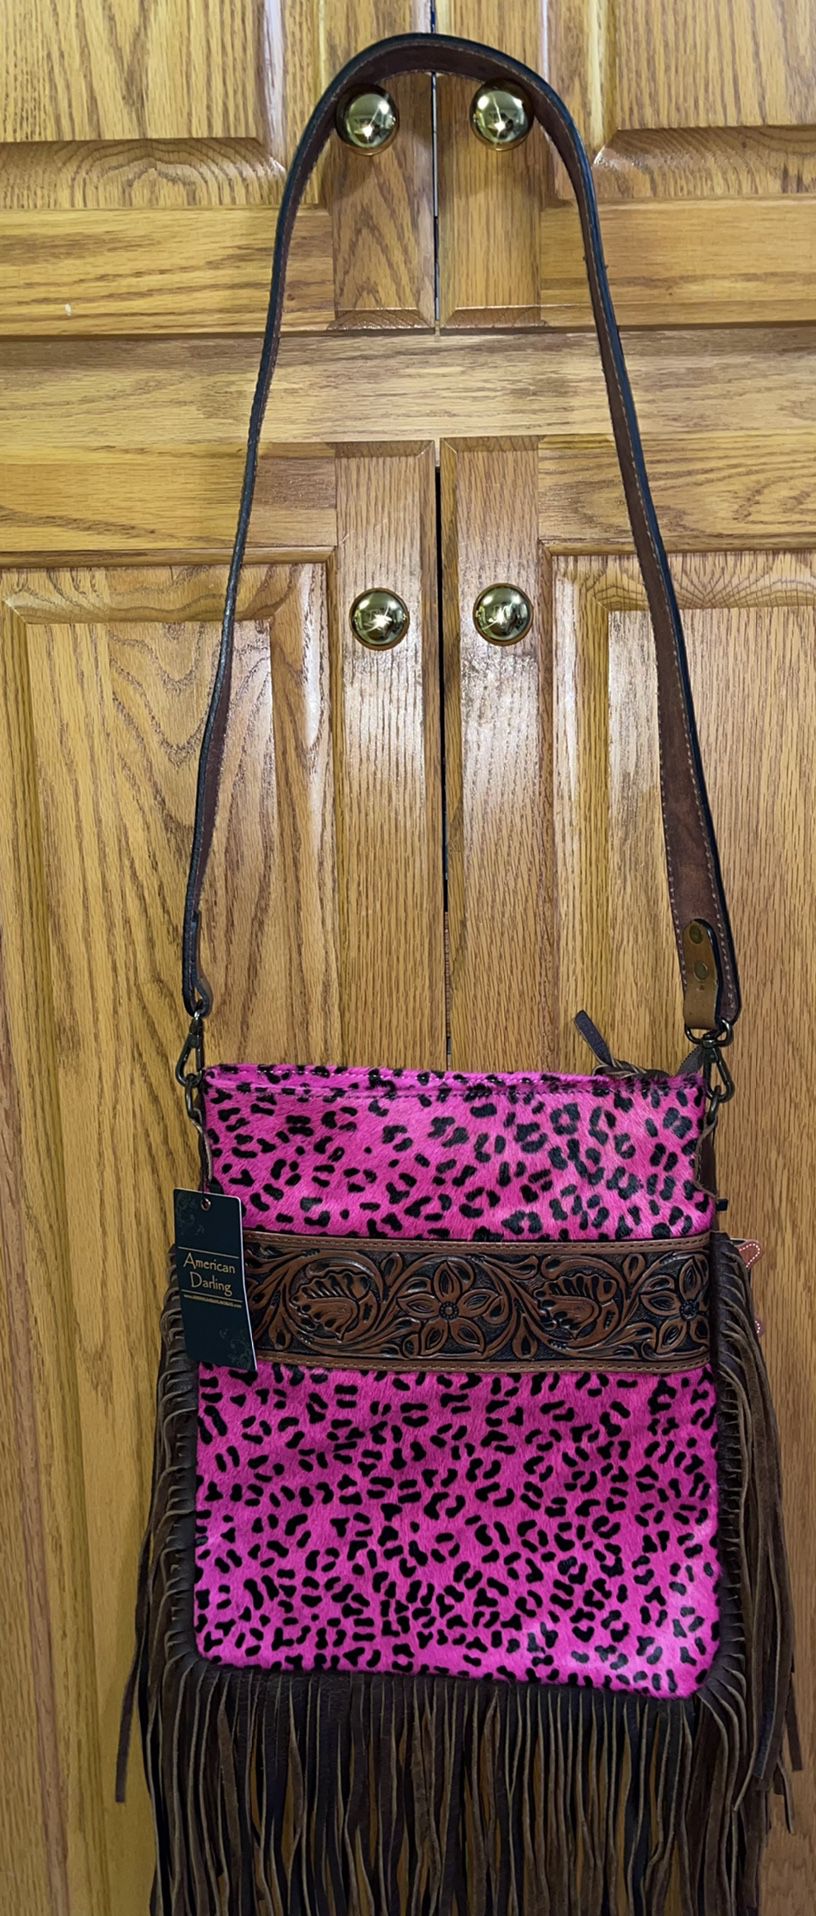 American Darling Purse For Concealed Carry 